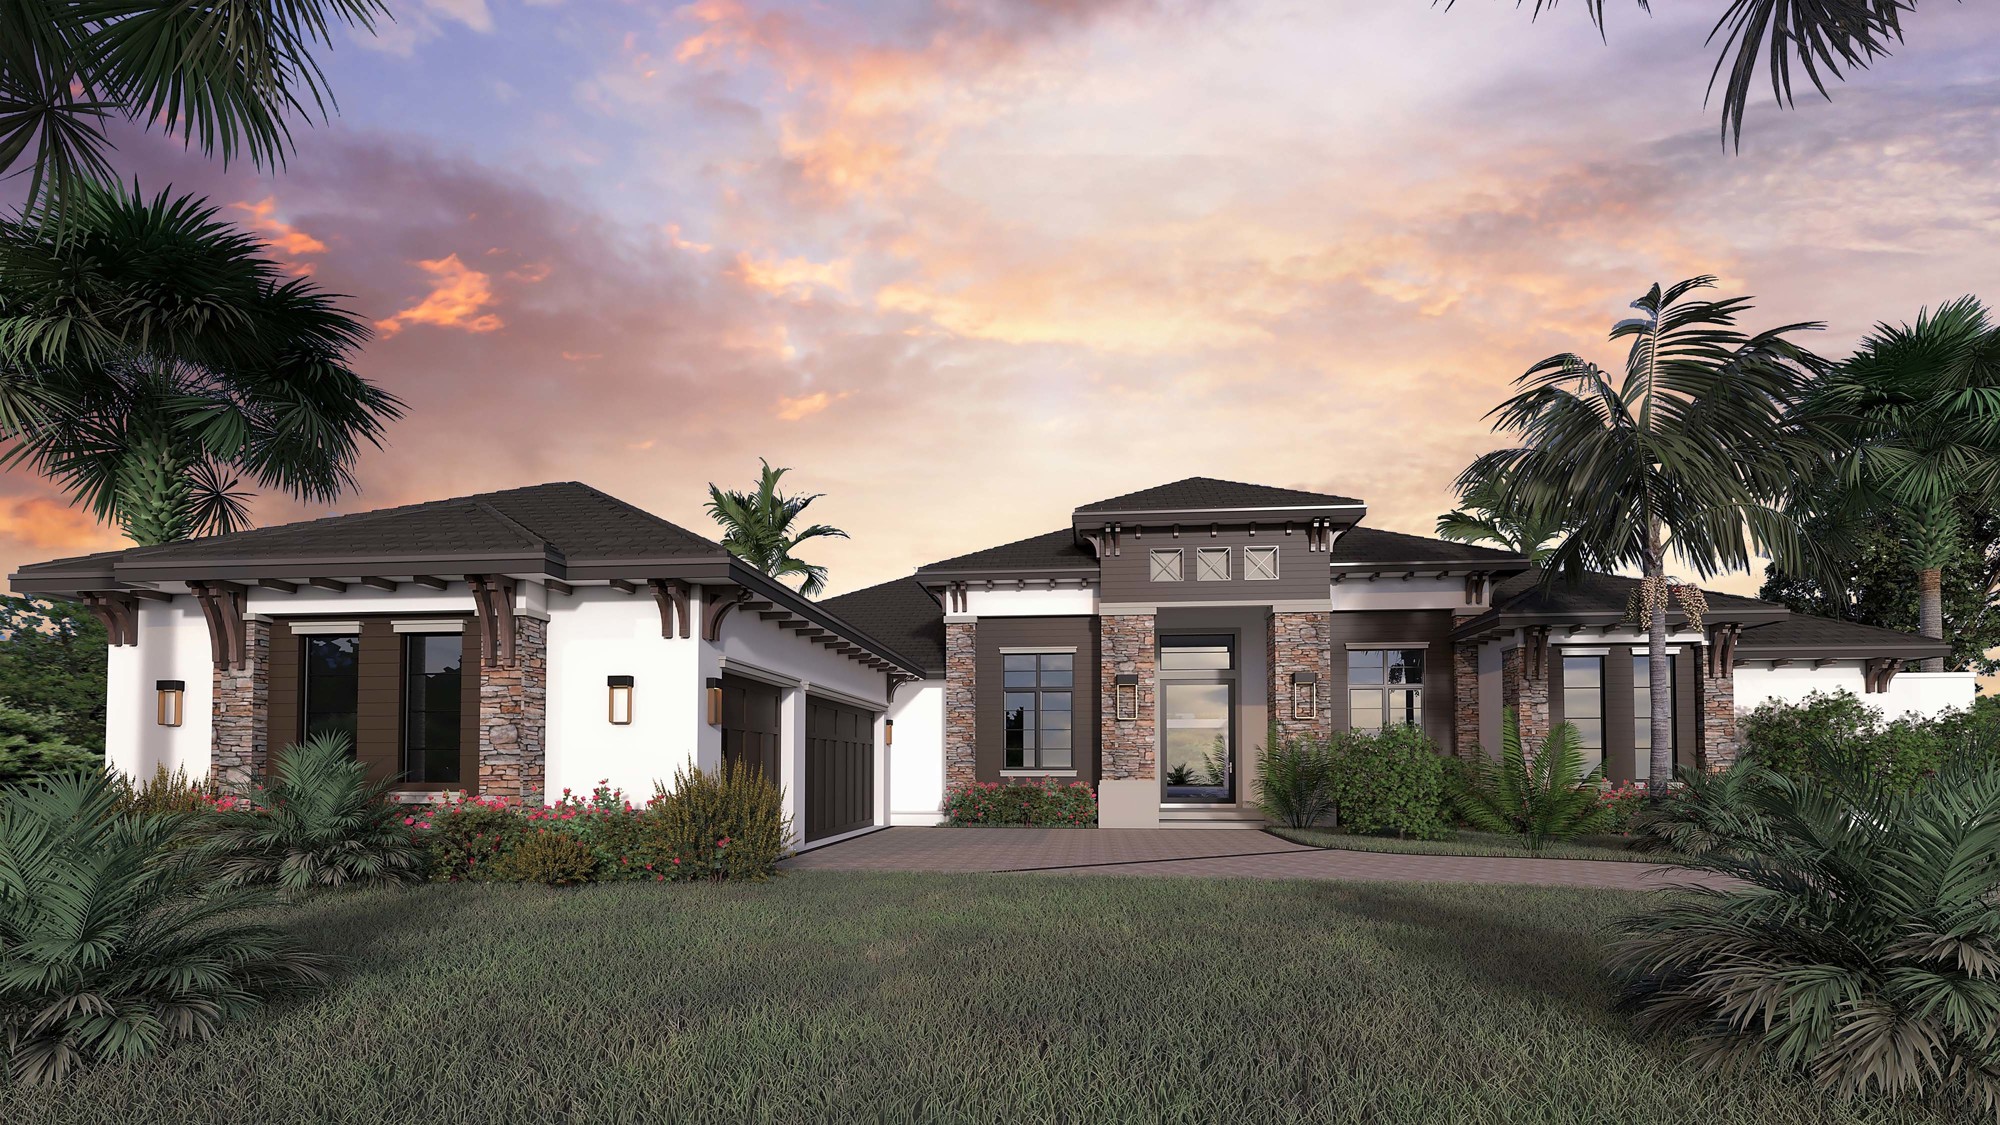 Courtesy. Builder John Cannon Homes’ three-bedroom, three-bath Adelaide will offer more than 5,000 square feet with a gourmet kitchen and golf simulator room.